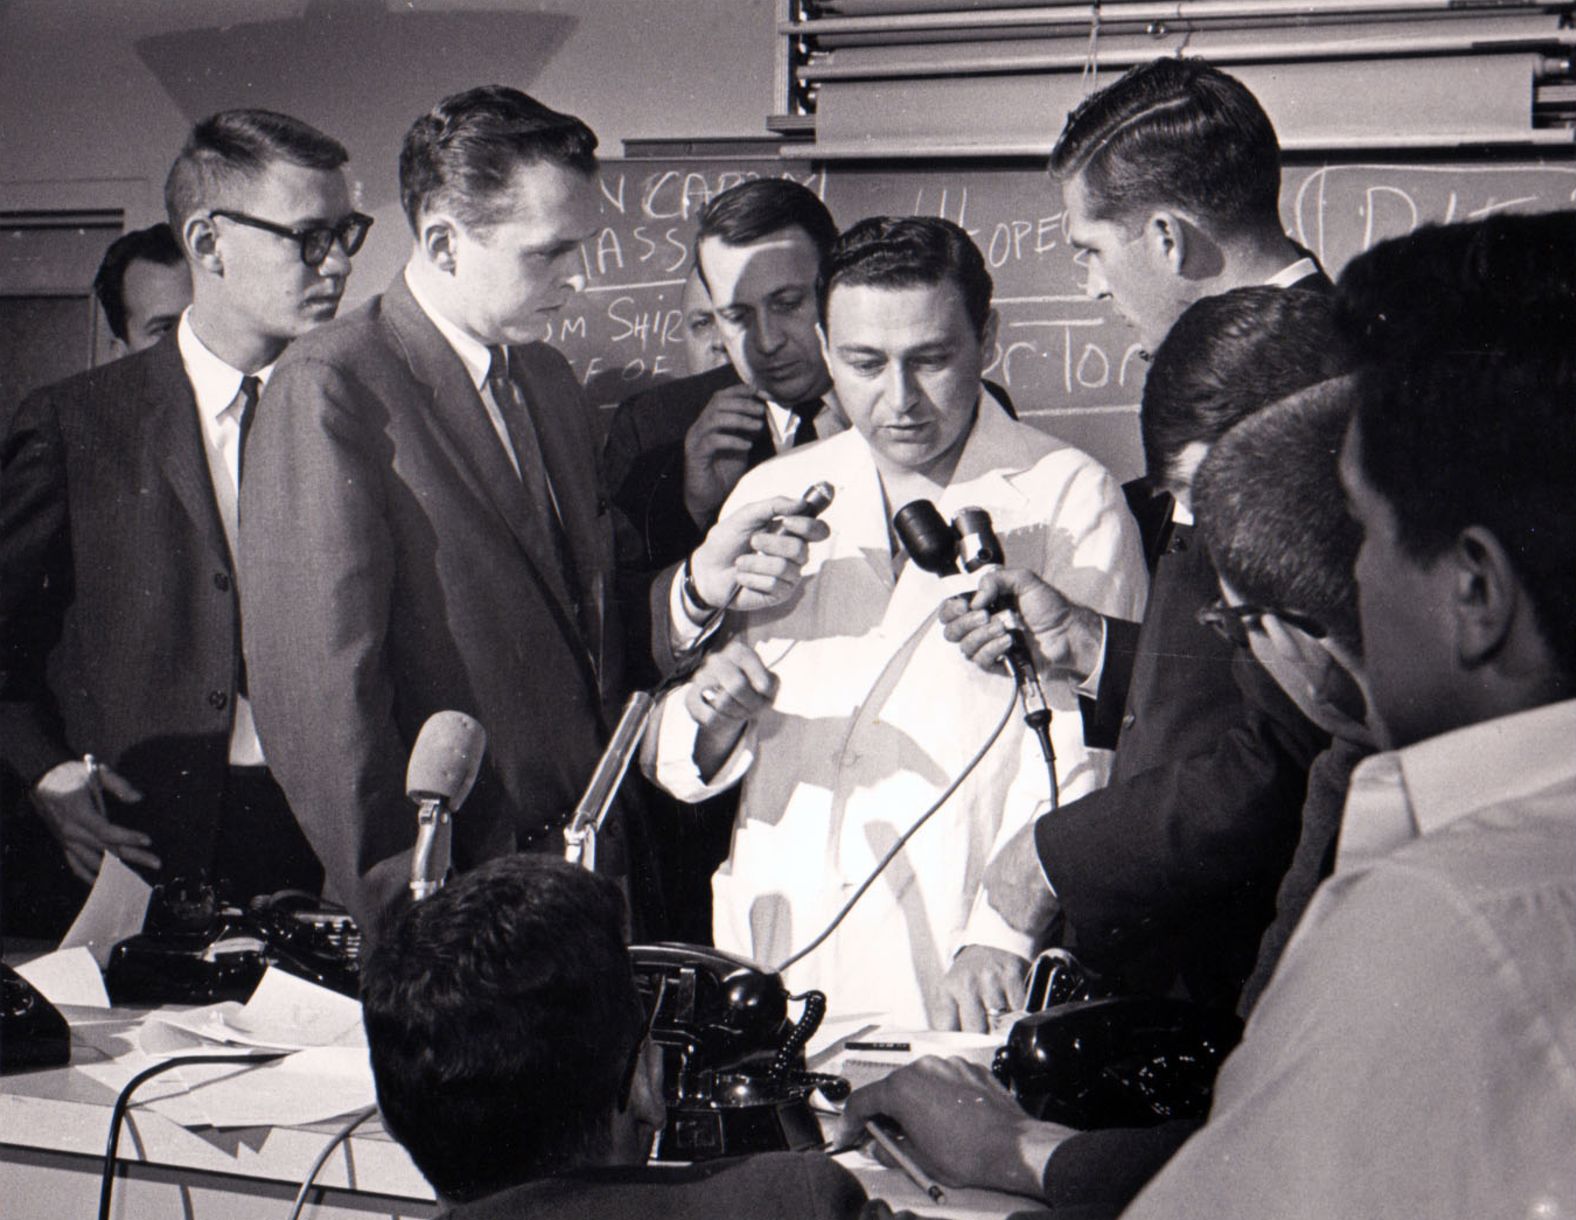 Dr. Tom Shires describes the president's wounds to the press. Four doctors worked on Kennedy inside the emergency room.